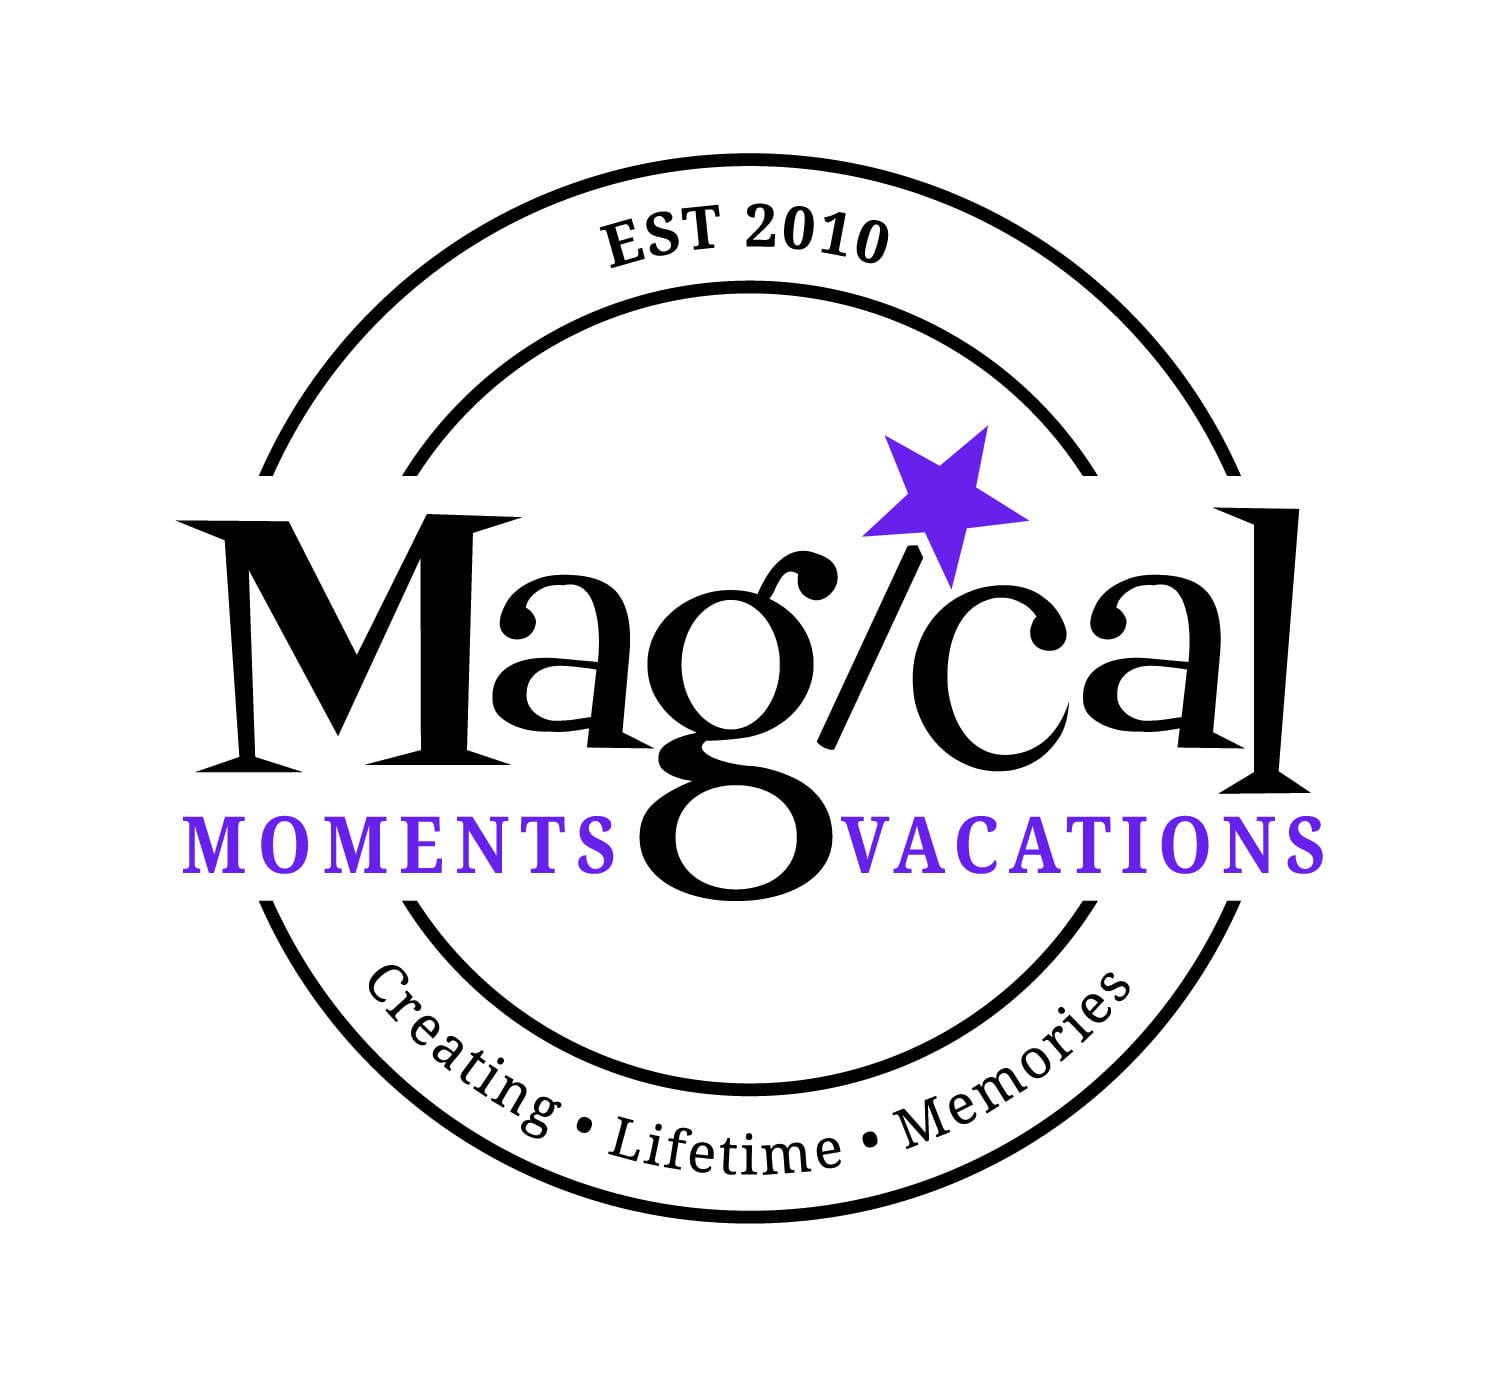 Magical Moments Vacations: Creating lifetime memories